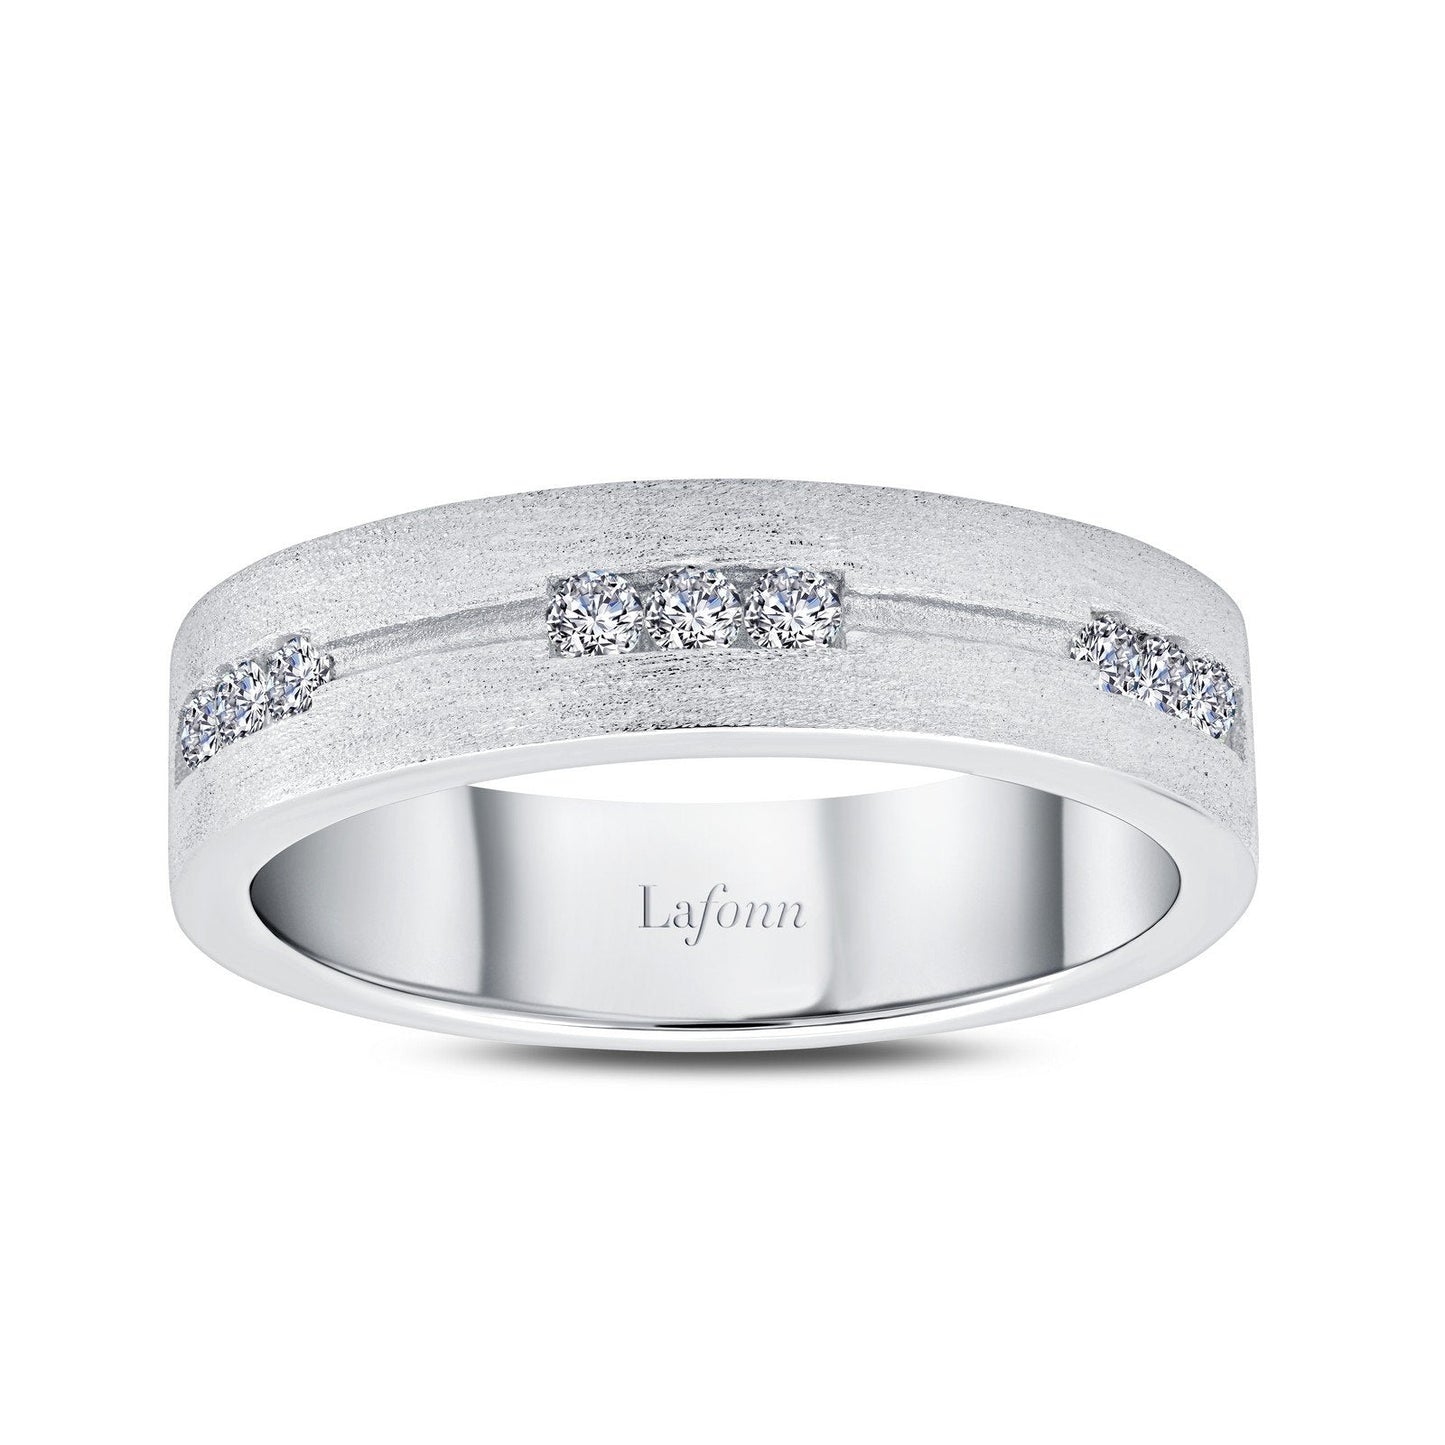 Lafonn 0.27 CTW Men's Wedding Band Simulated Diamond RINGS Size 12 Platinum 0.27 CTS Approx. 5.6mm (W)